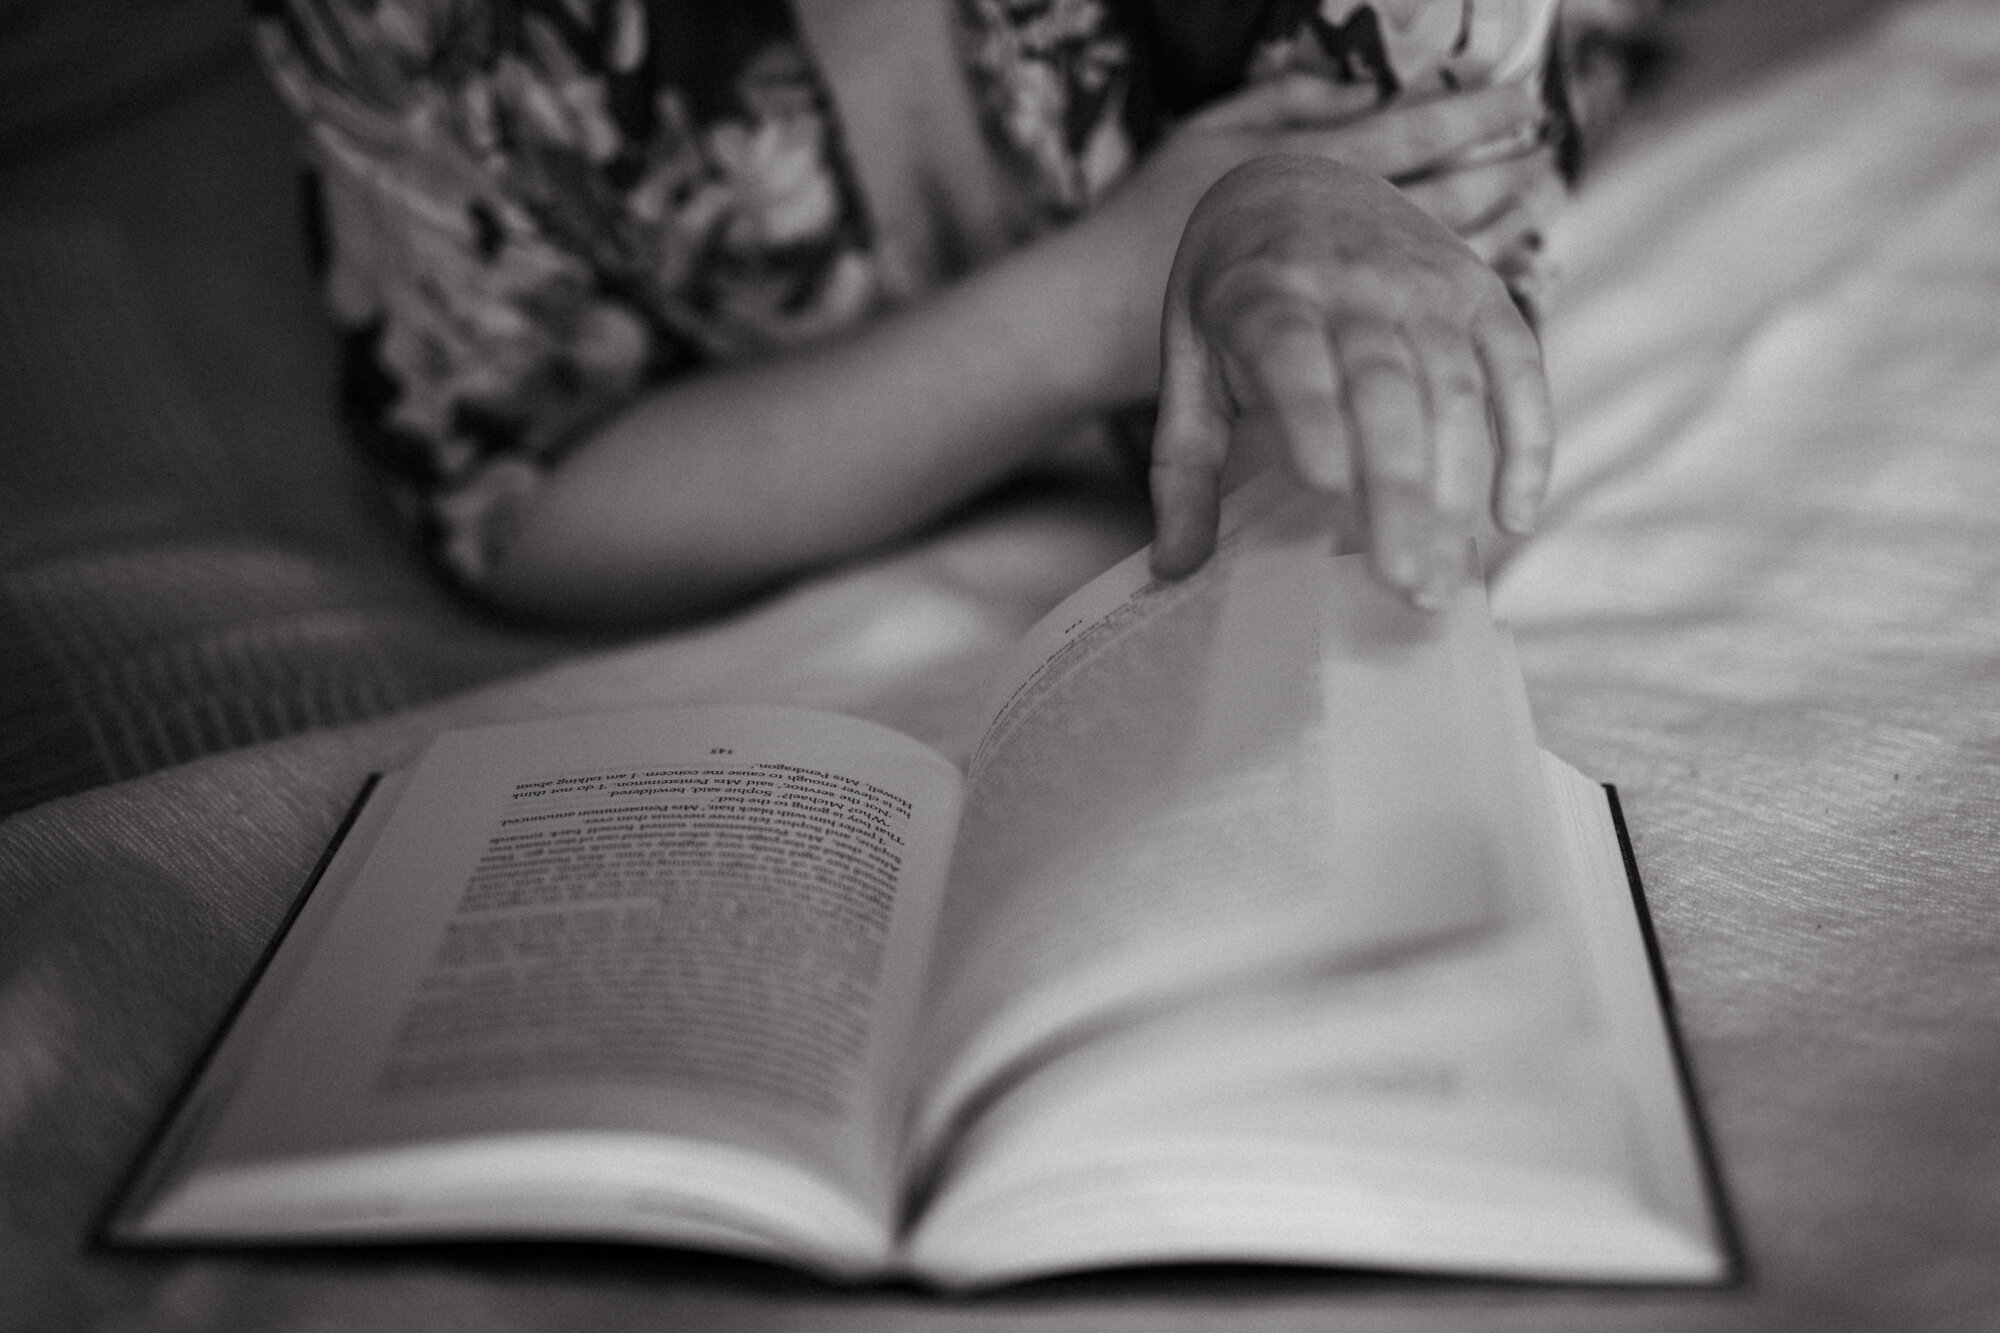 black and white photo of hands and pages of book being turned